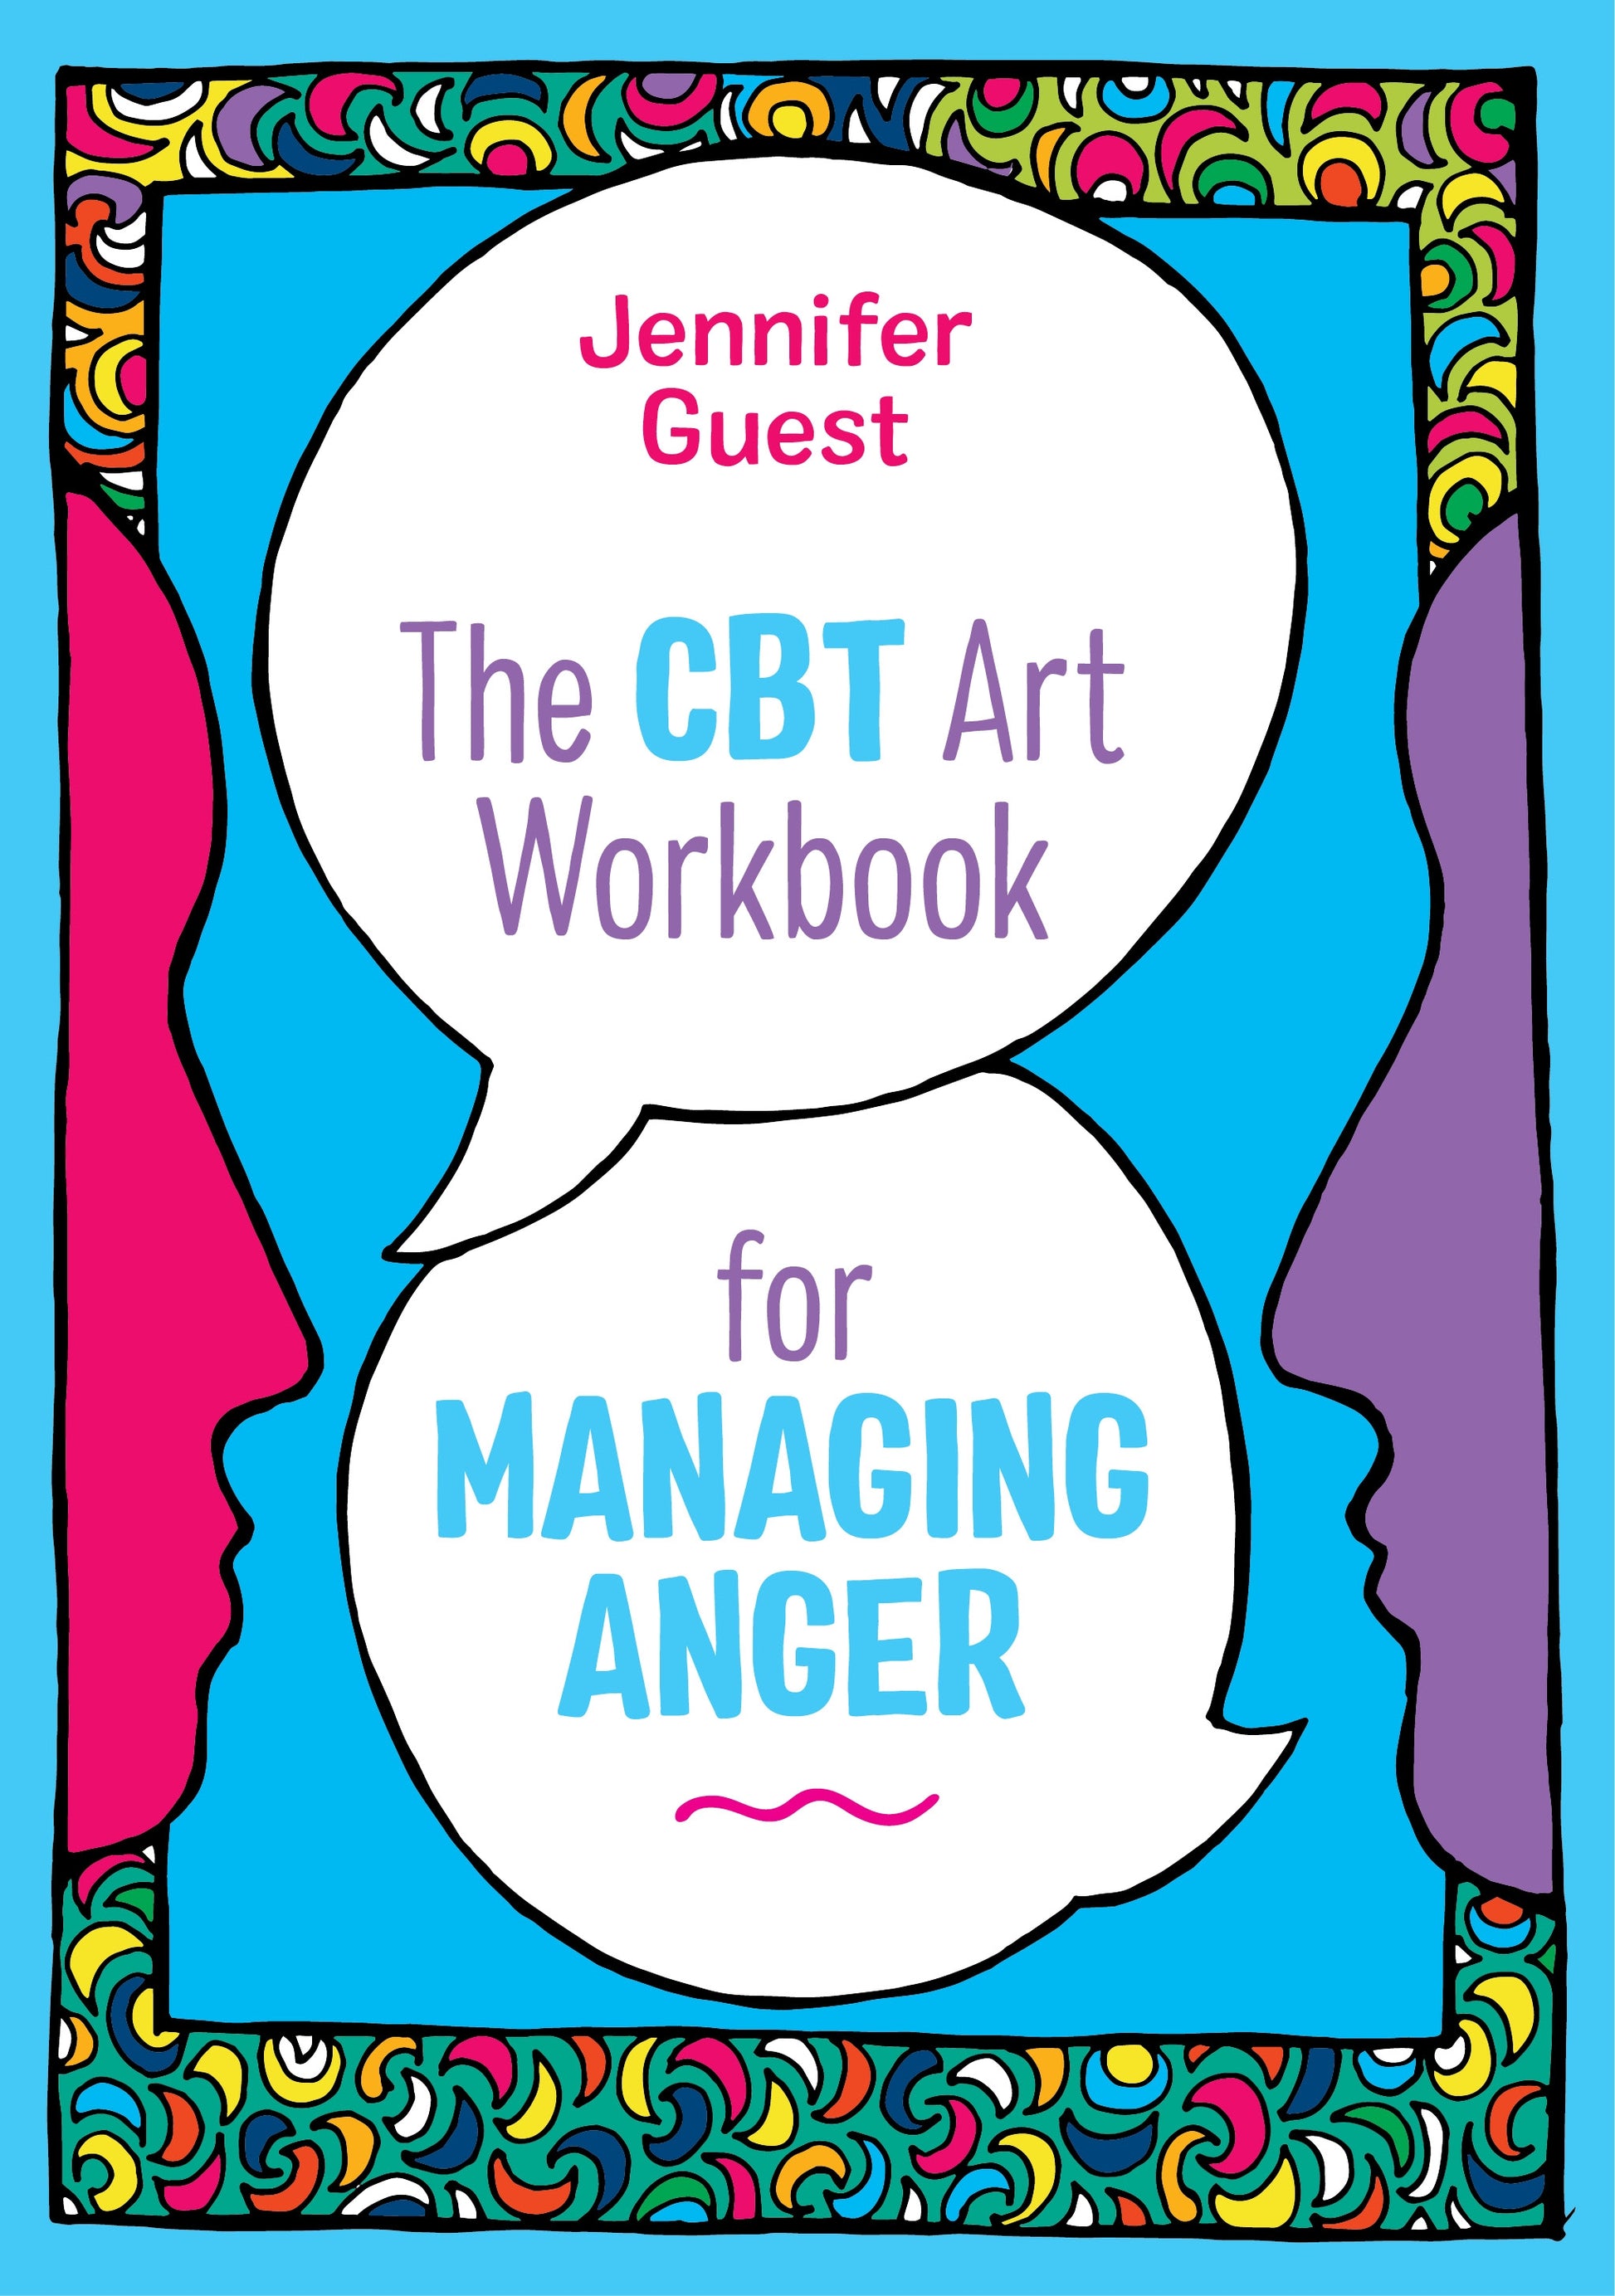 The CBT Art Workbook for Managing Anger by Jennifer Guest